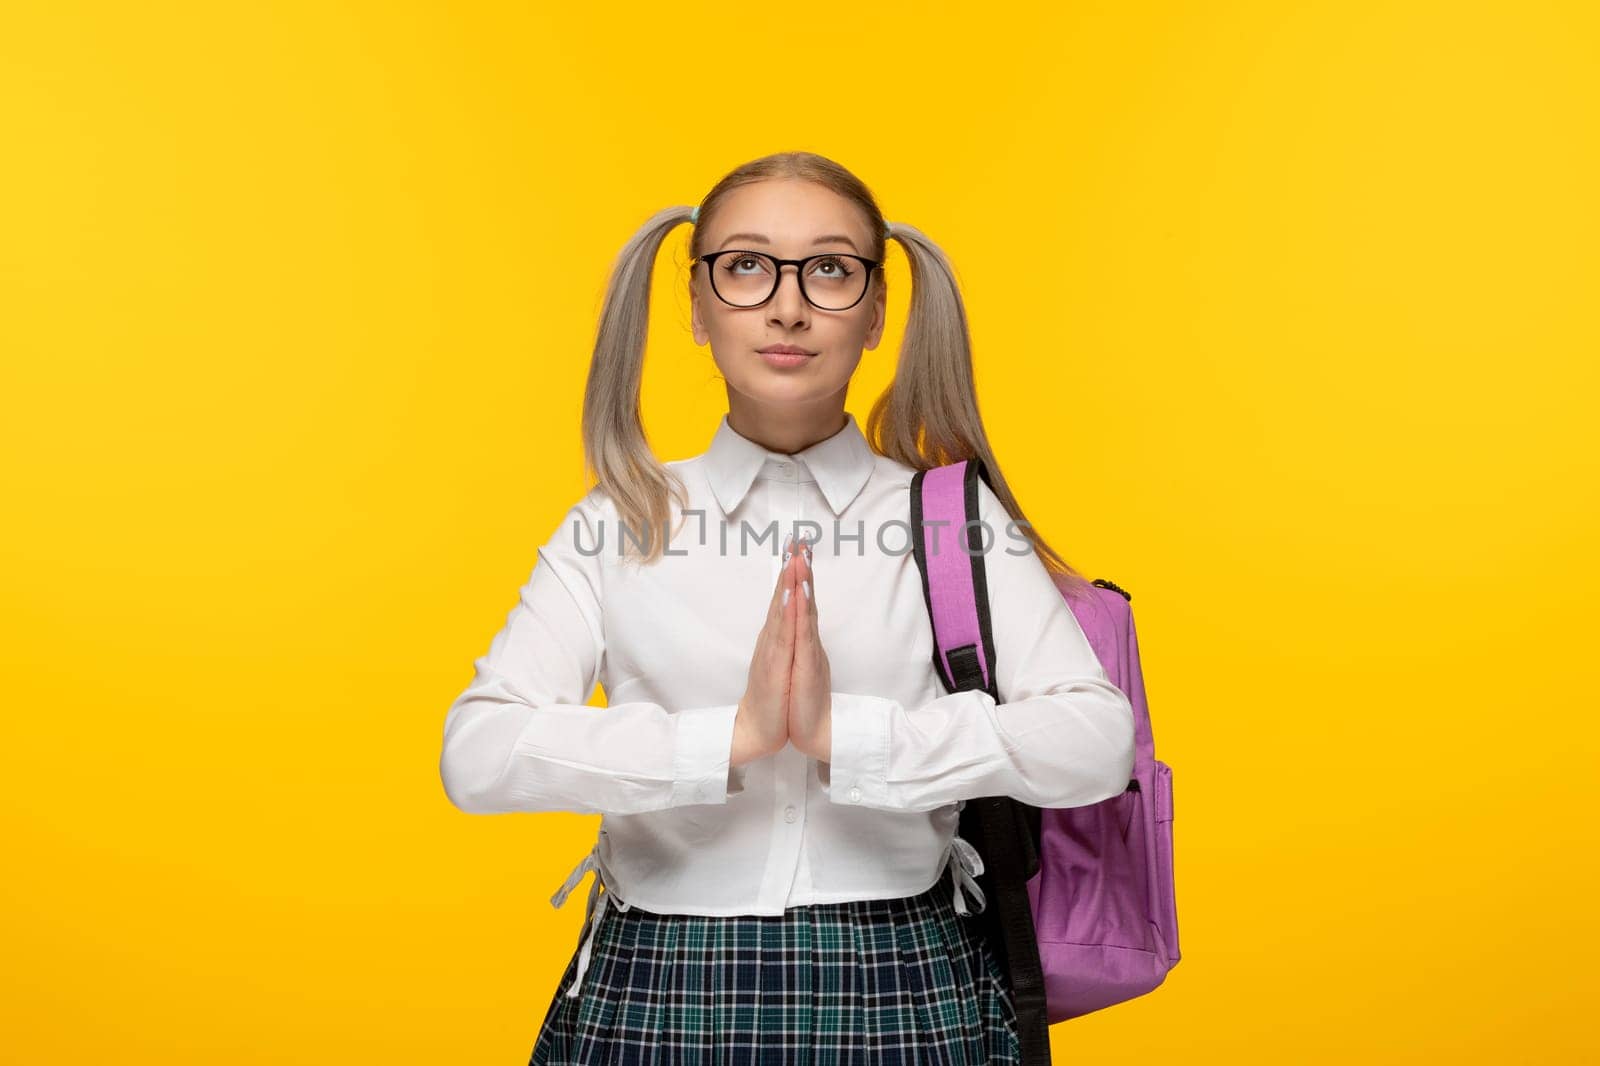 world book day blonde young girl praying hands together on yellow background